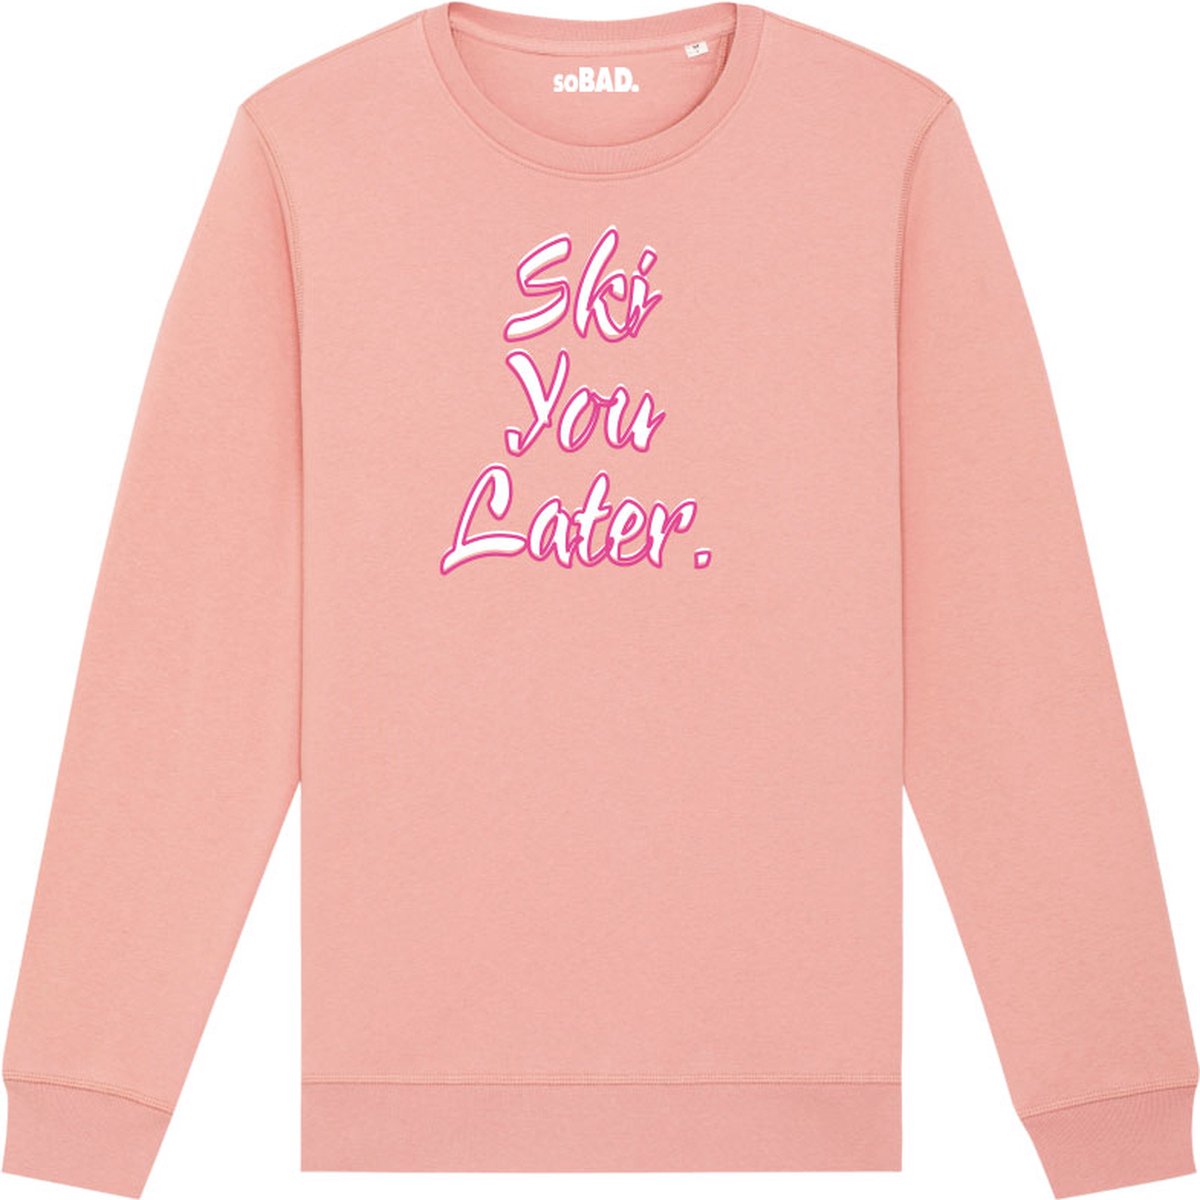 Wintersport sweater canyon pink XL - Ski you later - soBAD. | Foute apres ski outfit | kleding | verkleedkleren | wintersporttruien | wintersport dames en heren